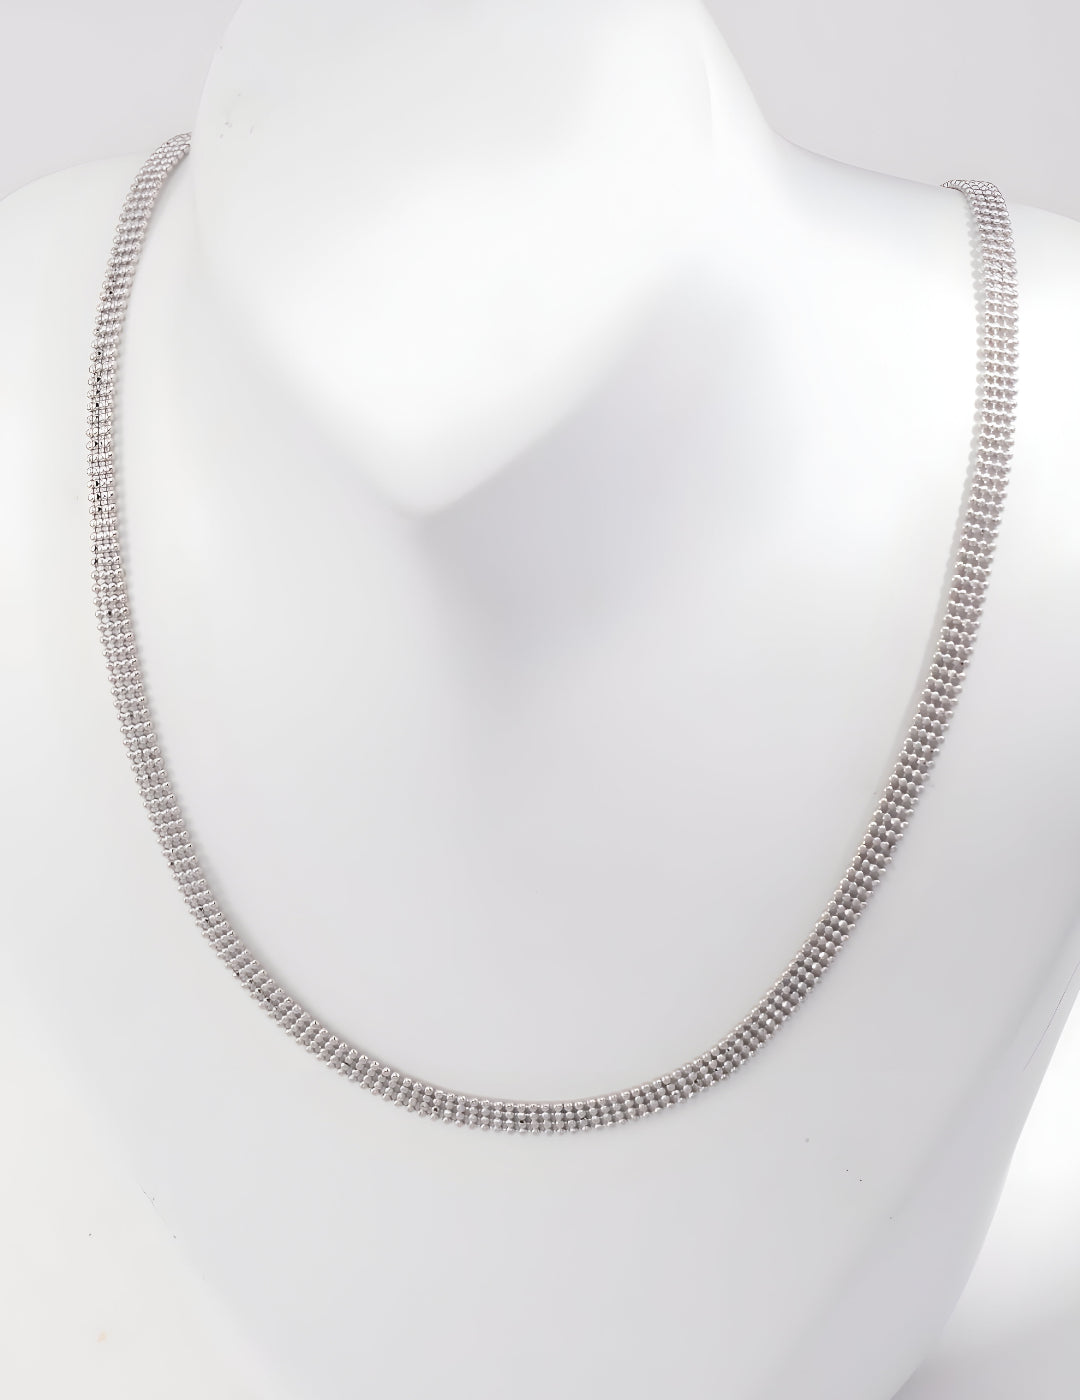 Timeless & Classic elegance adjustable necklace - S925 sterling pure silver - 18K Gold Vermeil